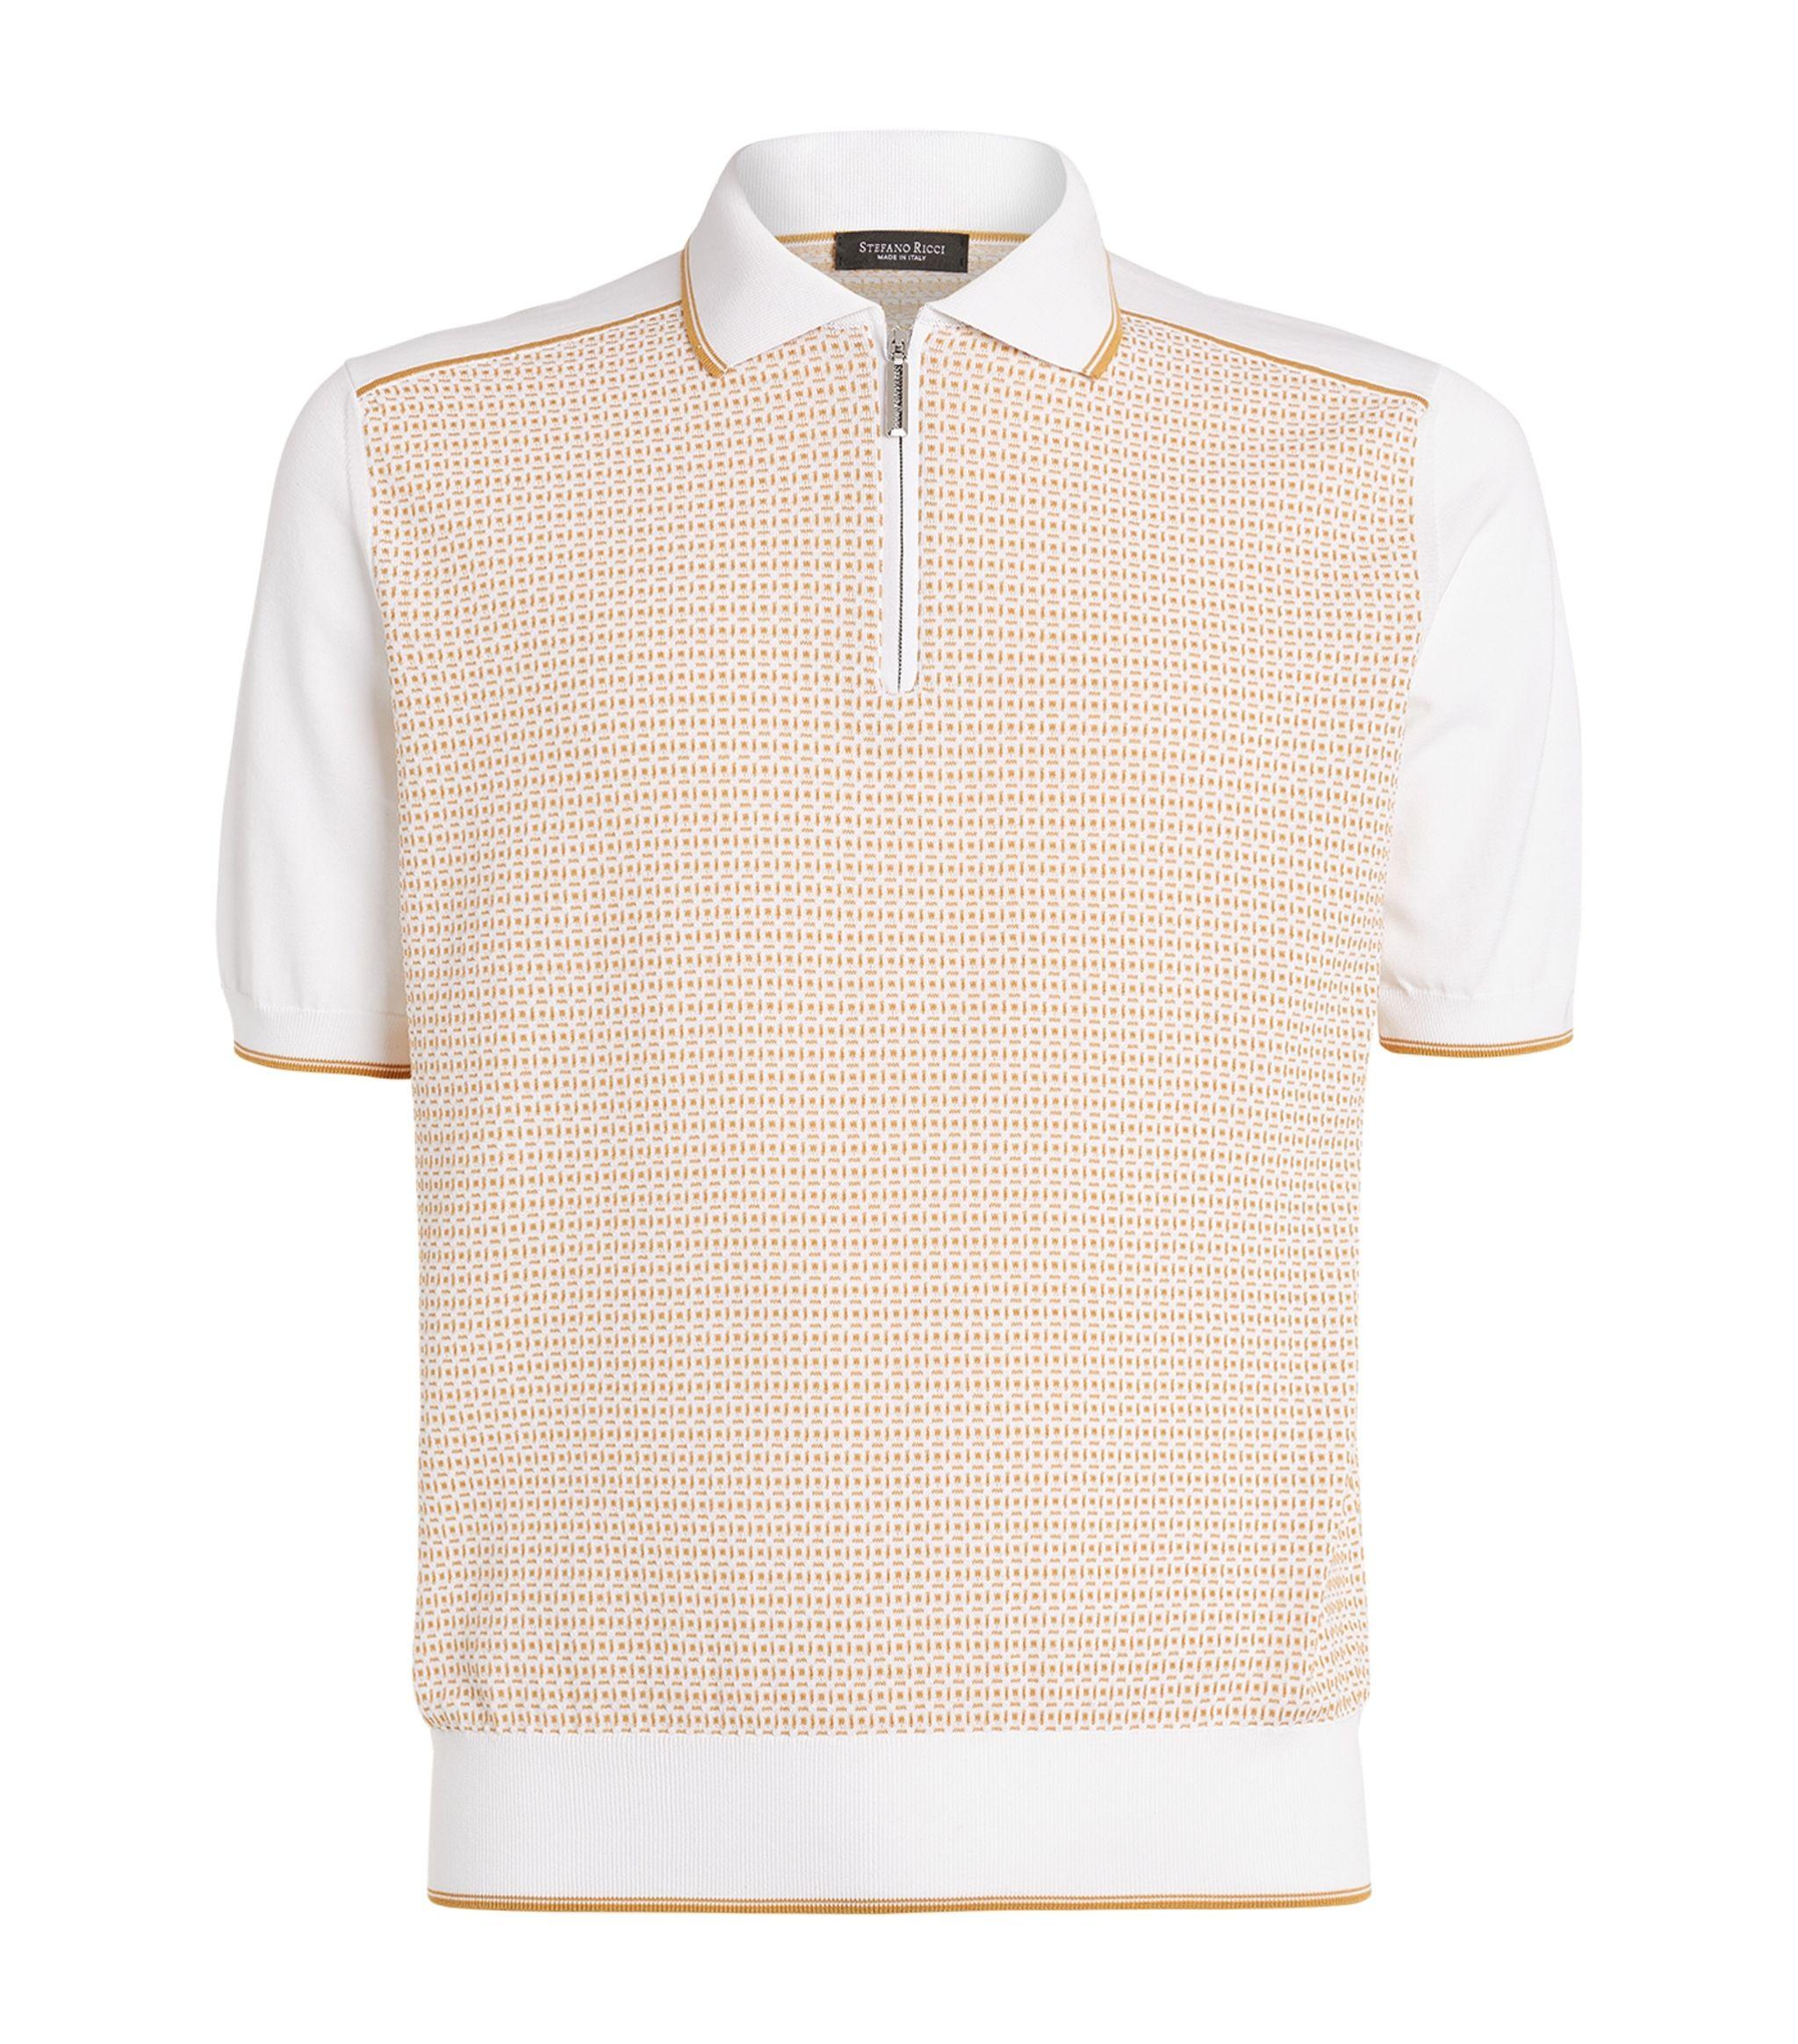 Stefano Ricci Cotton Jacquard Polo Shirt in Natural for Men - Lyst